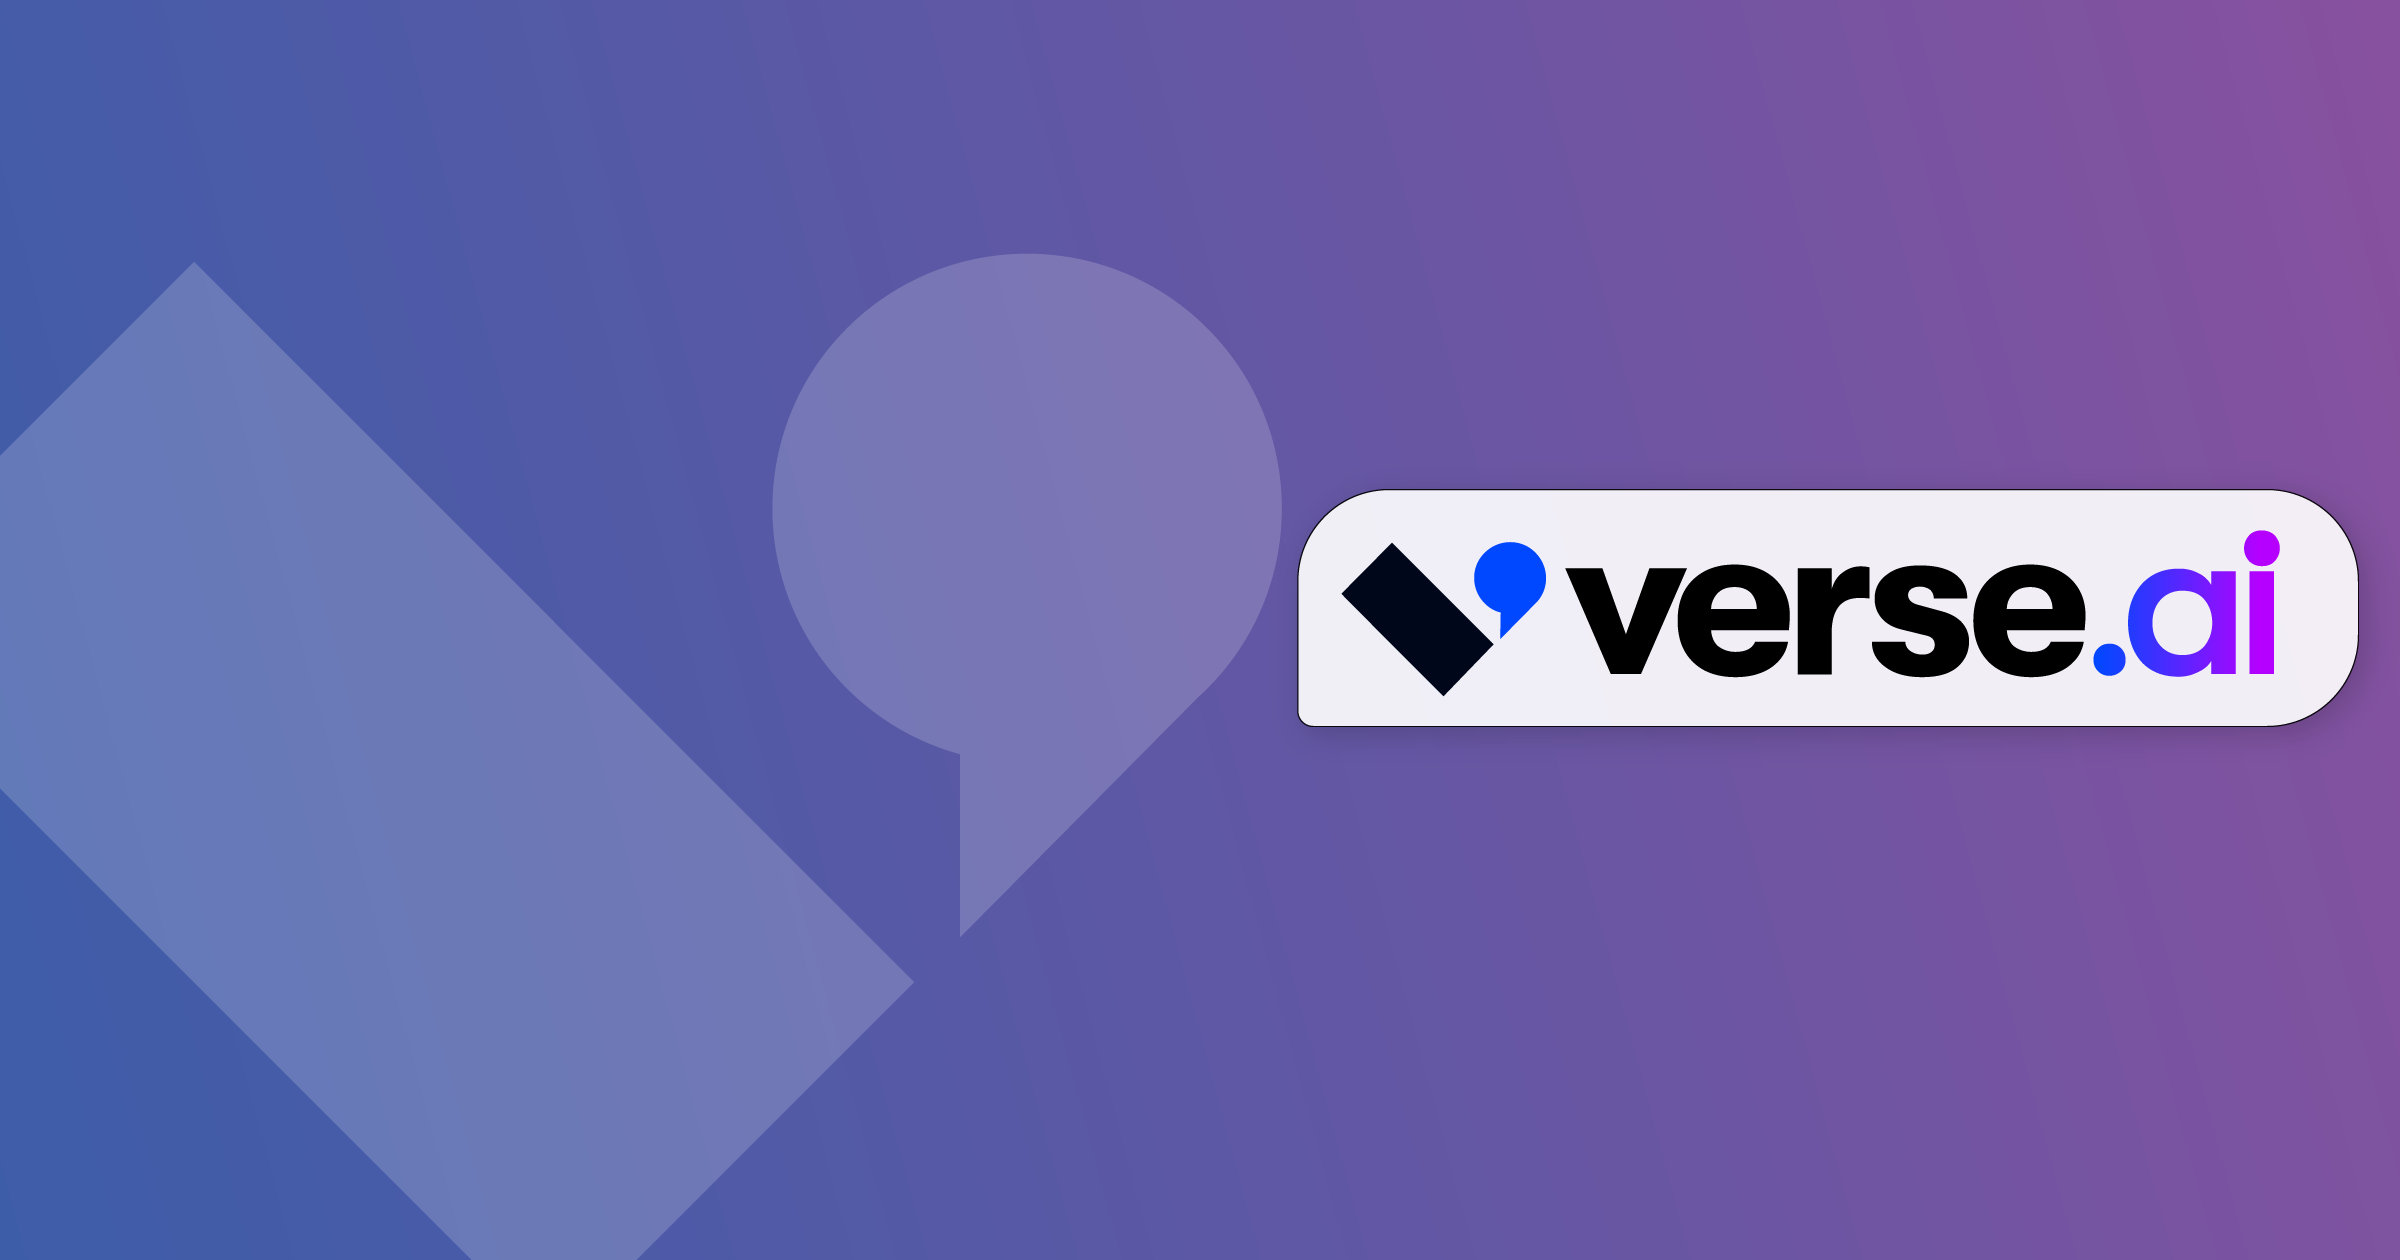 Verse announces rebrand to Verse.ai Featured Image